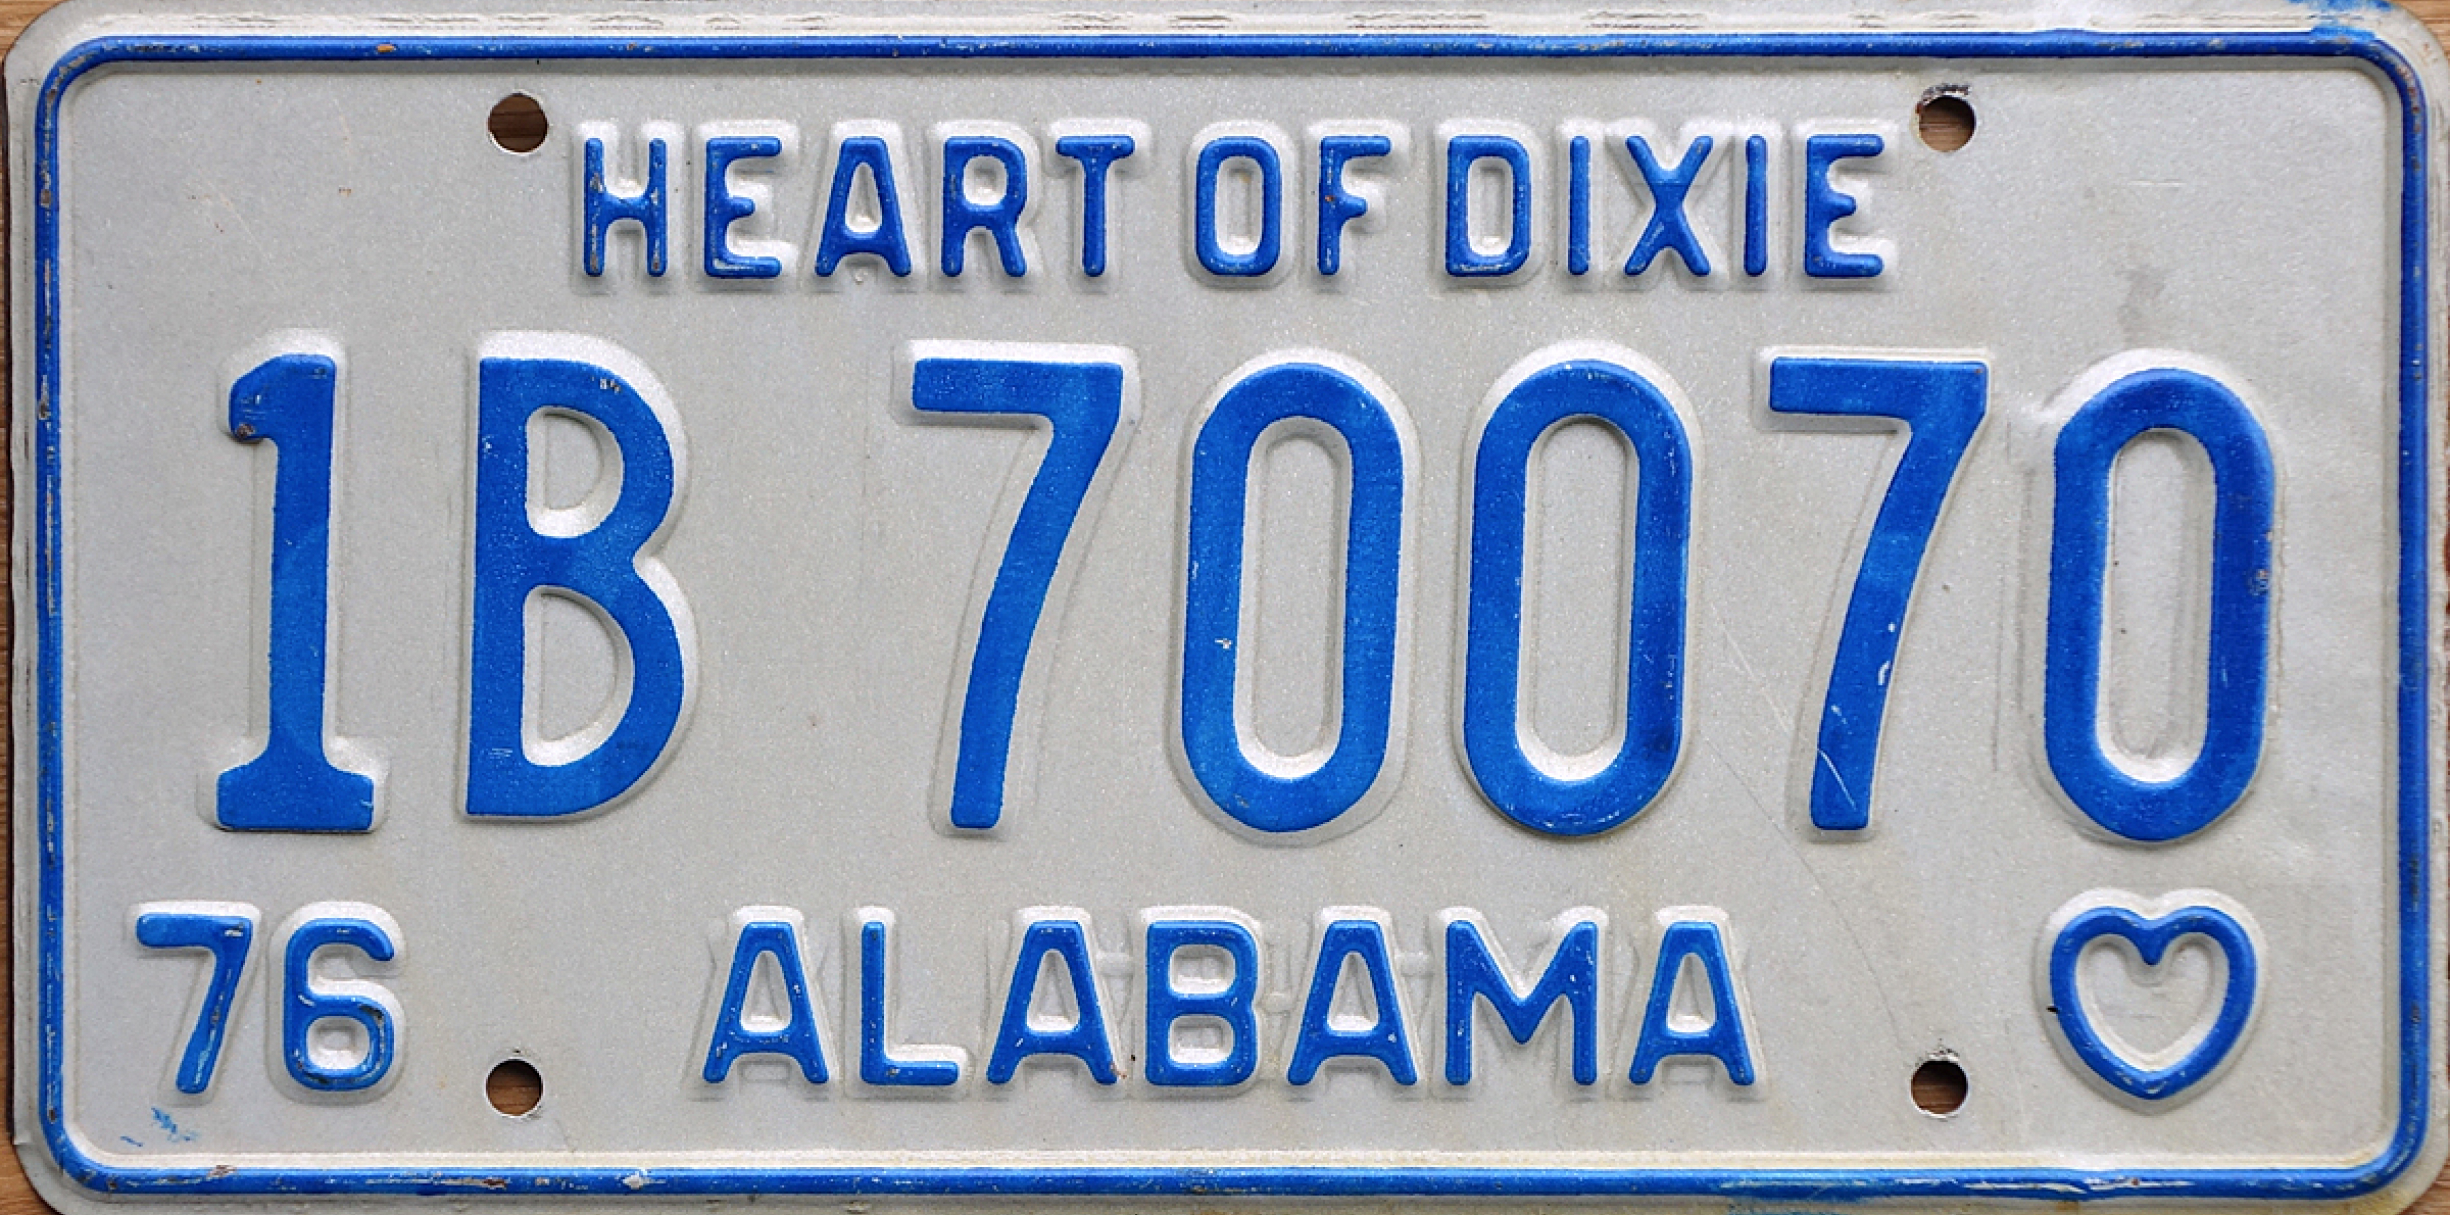 A 1976 Alabama license plate with the number 1B-70070